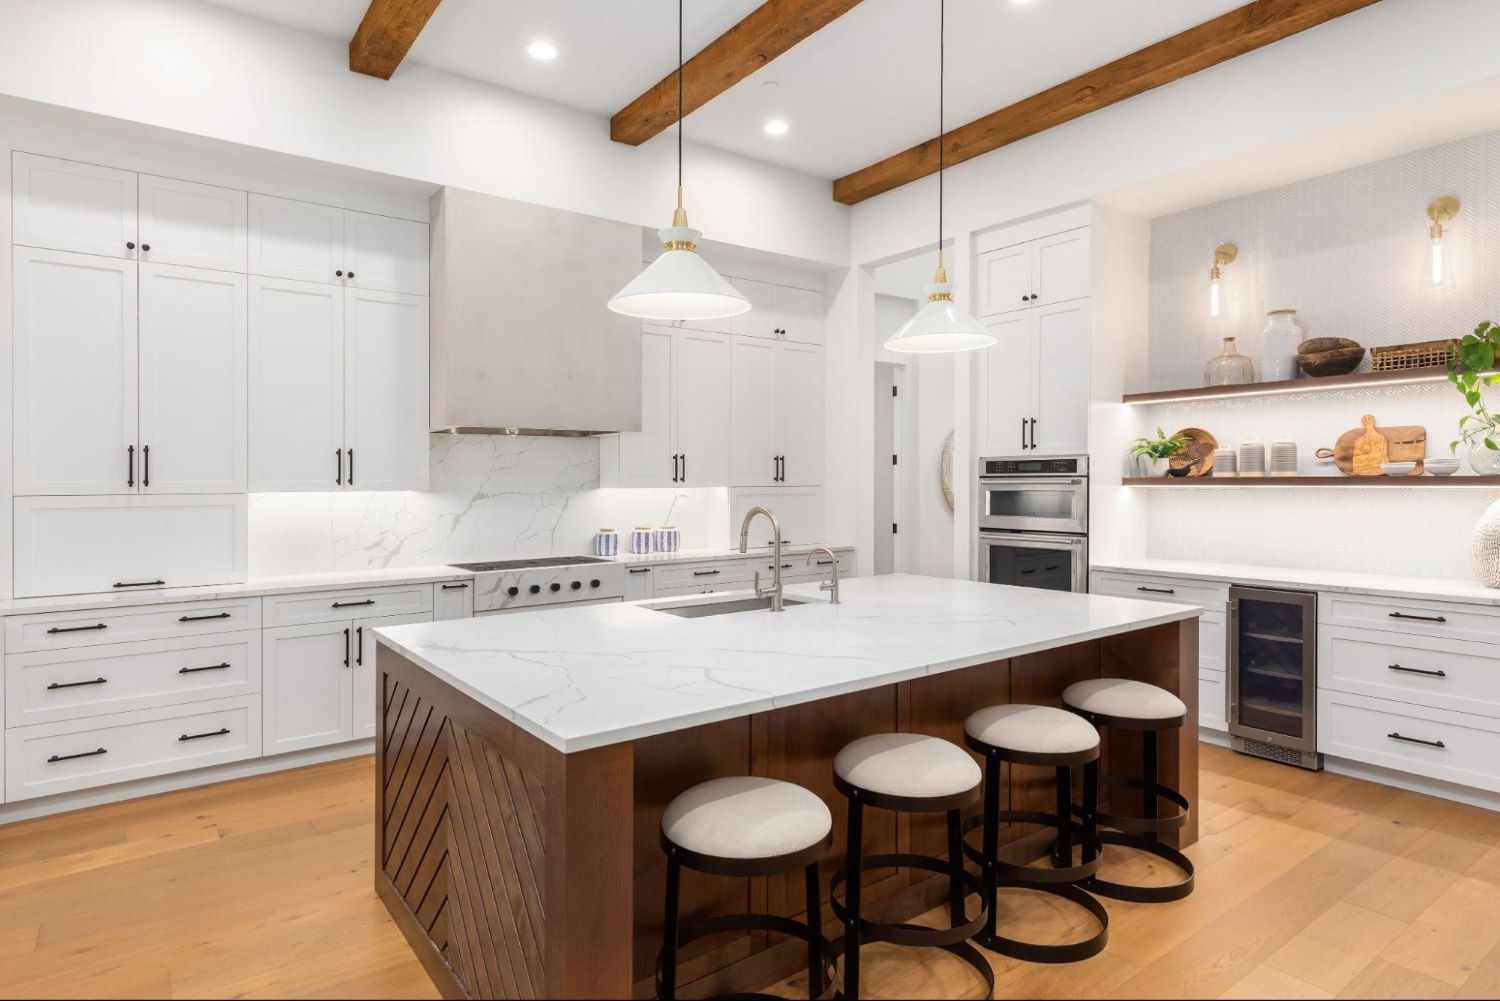 Darkwood Island with White Countertop and Seating in a Big Kitchen